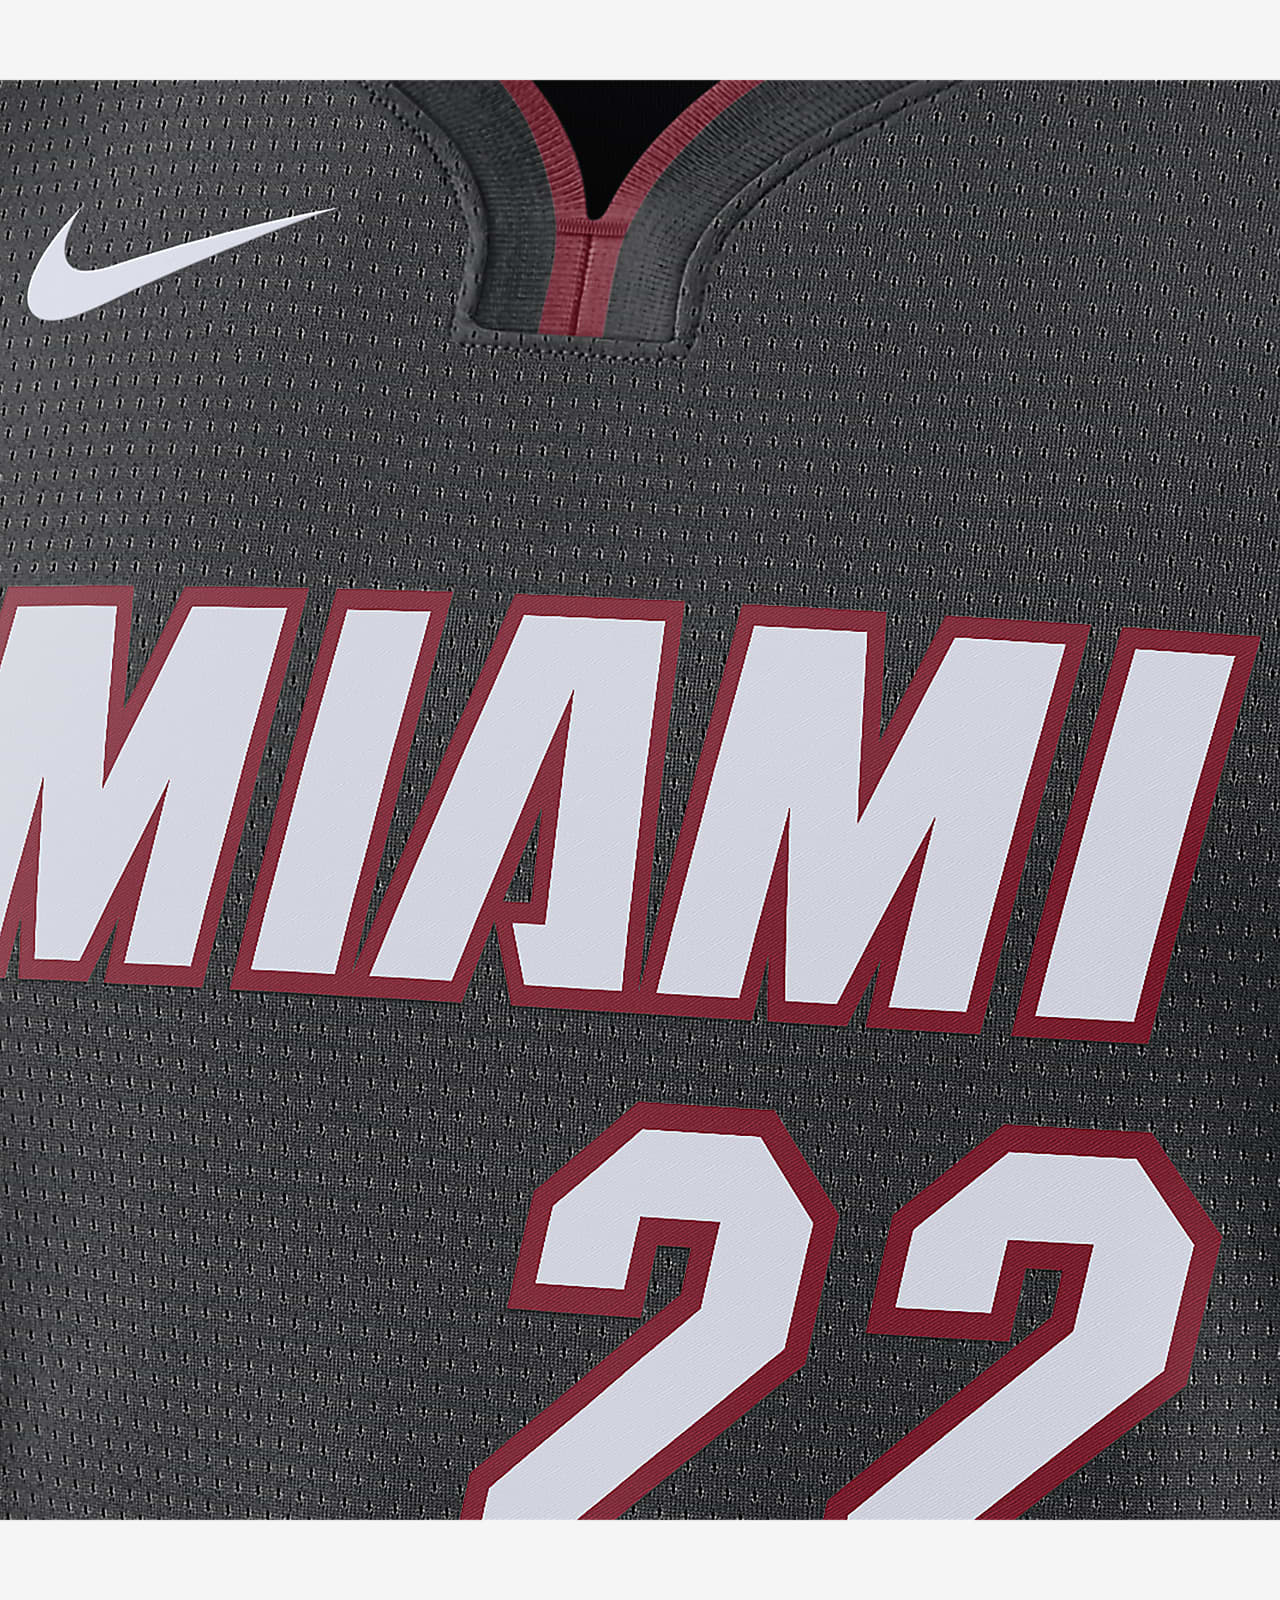 199 Miami Heat Logo Stock Photos, High-Res Pictures, and Images